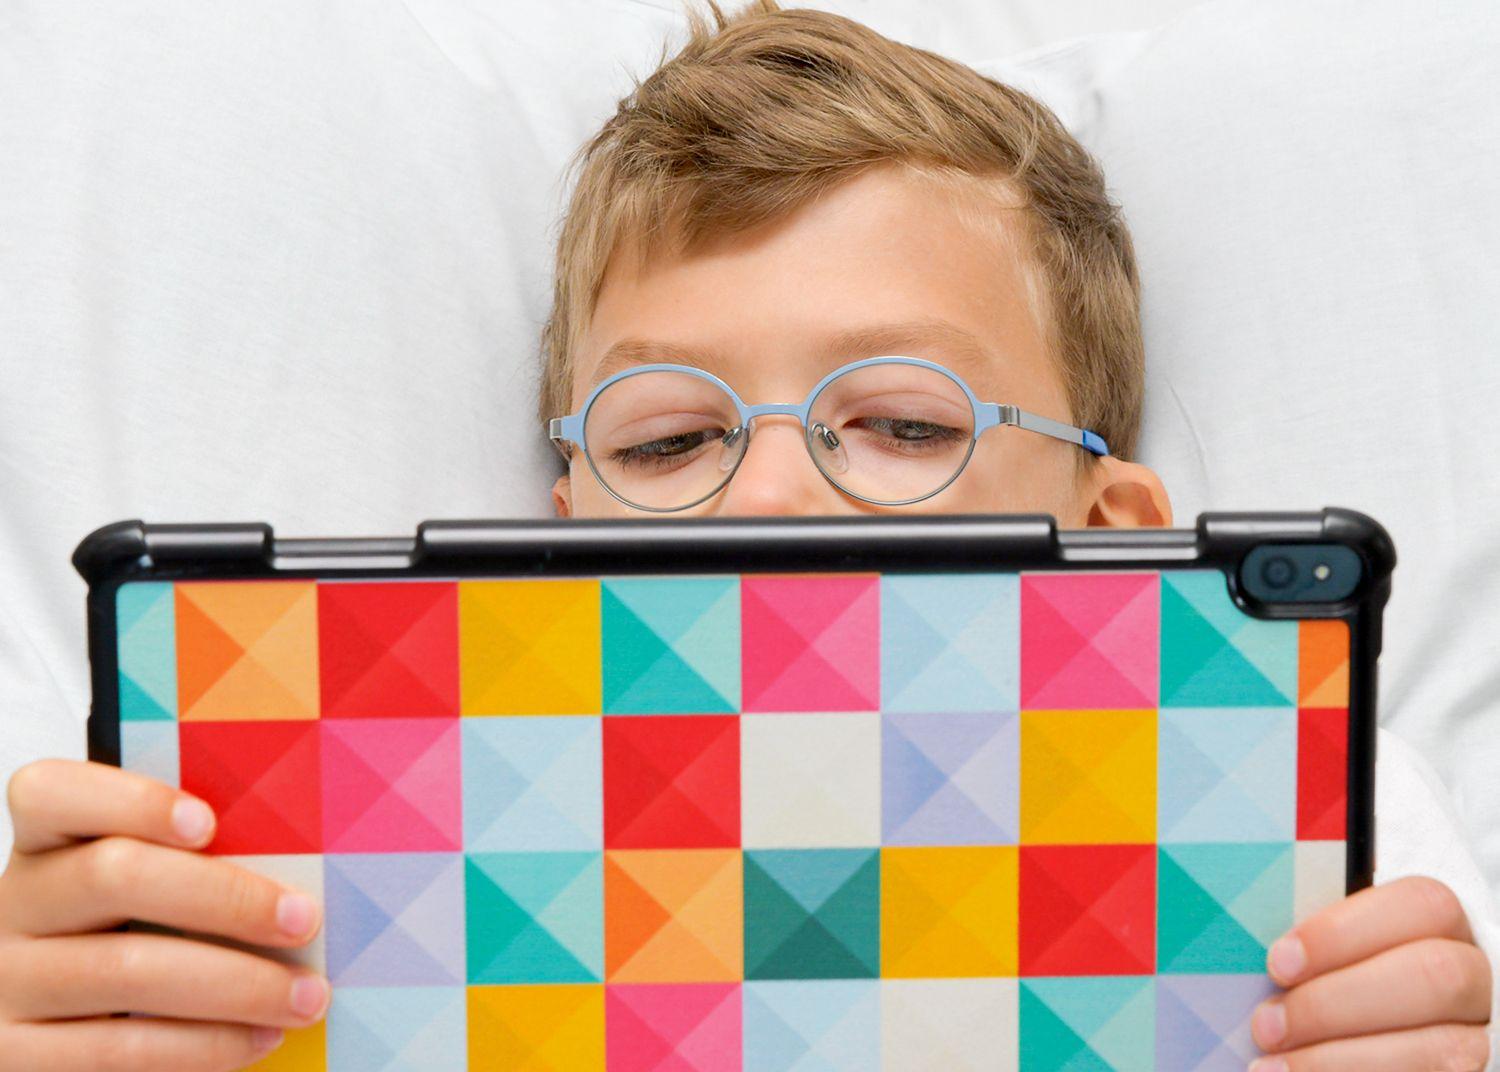 Boy with blue and round glasses is lying in bed looking at a tablet.